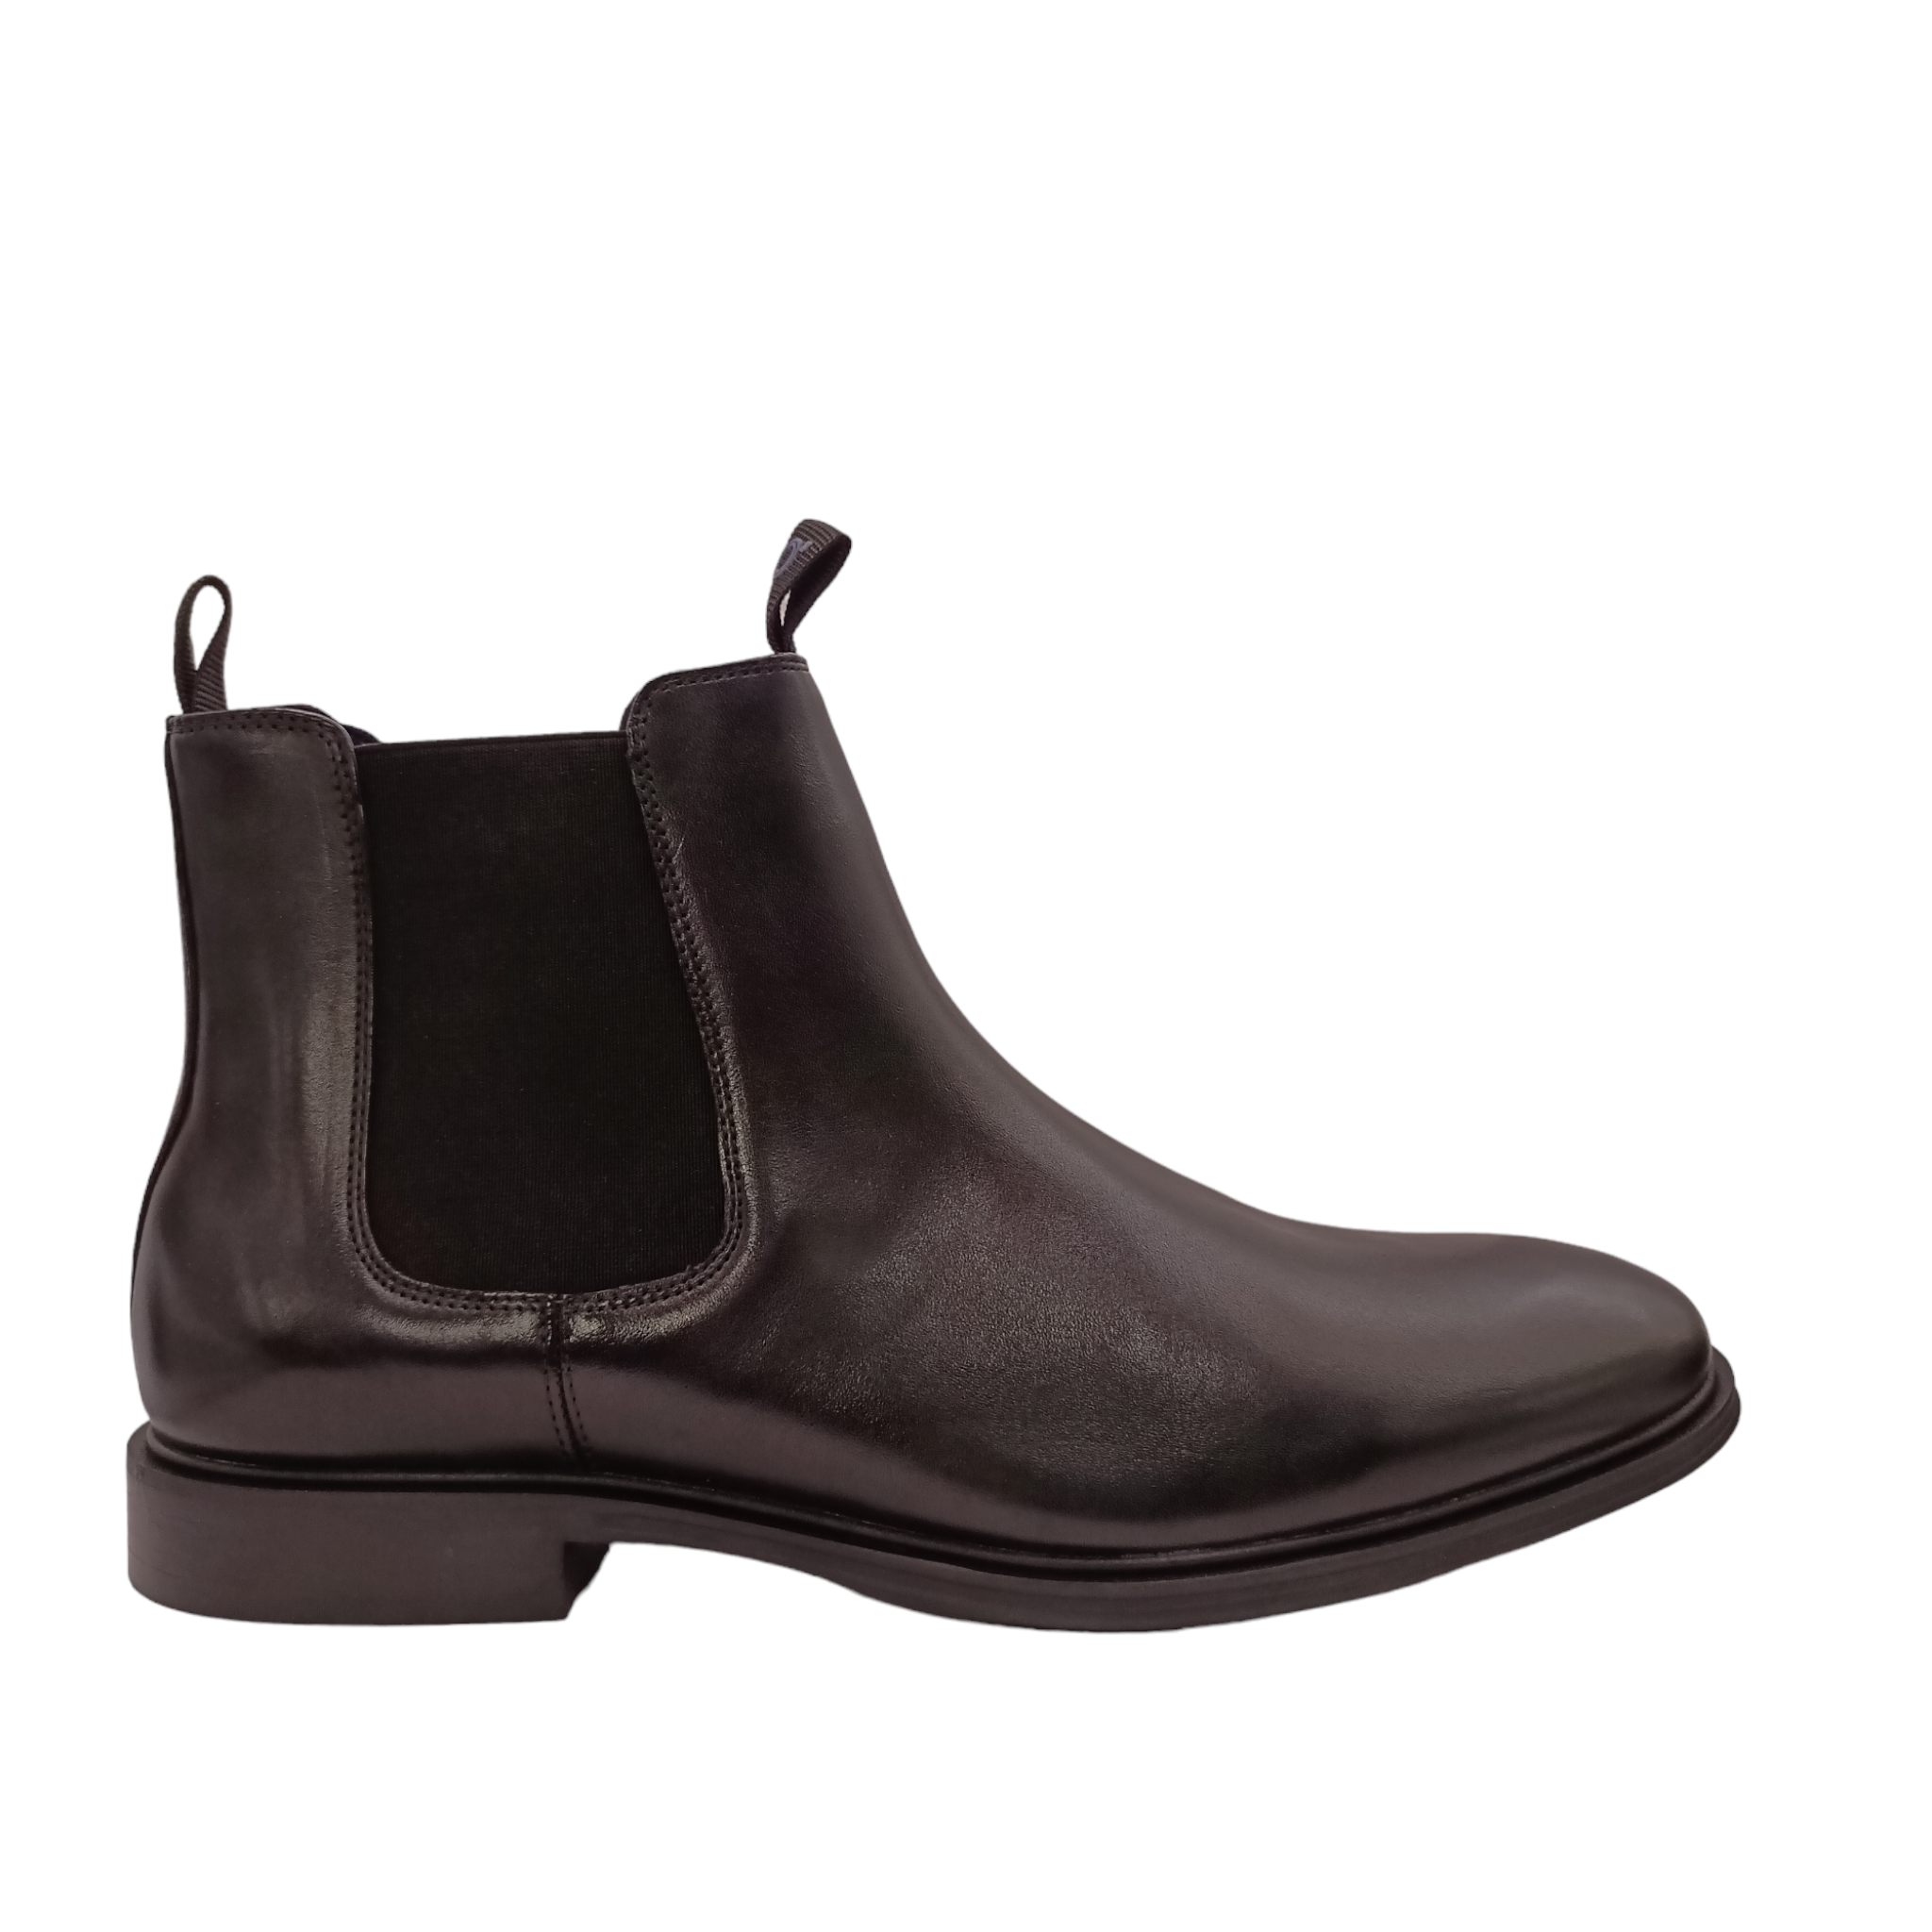 Shop Longreach Julius Marlow - with shoe&me - from Julius Marlow - Boots - Boot, Mens, Winter